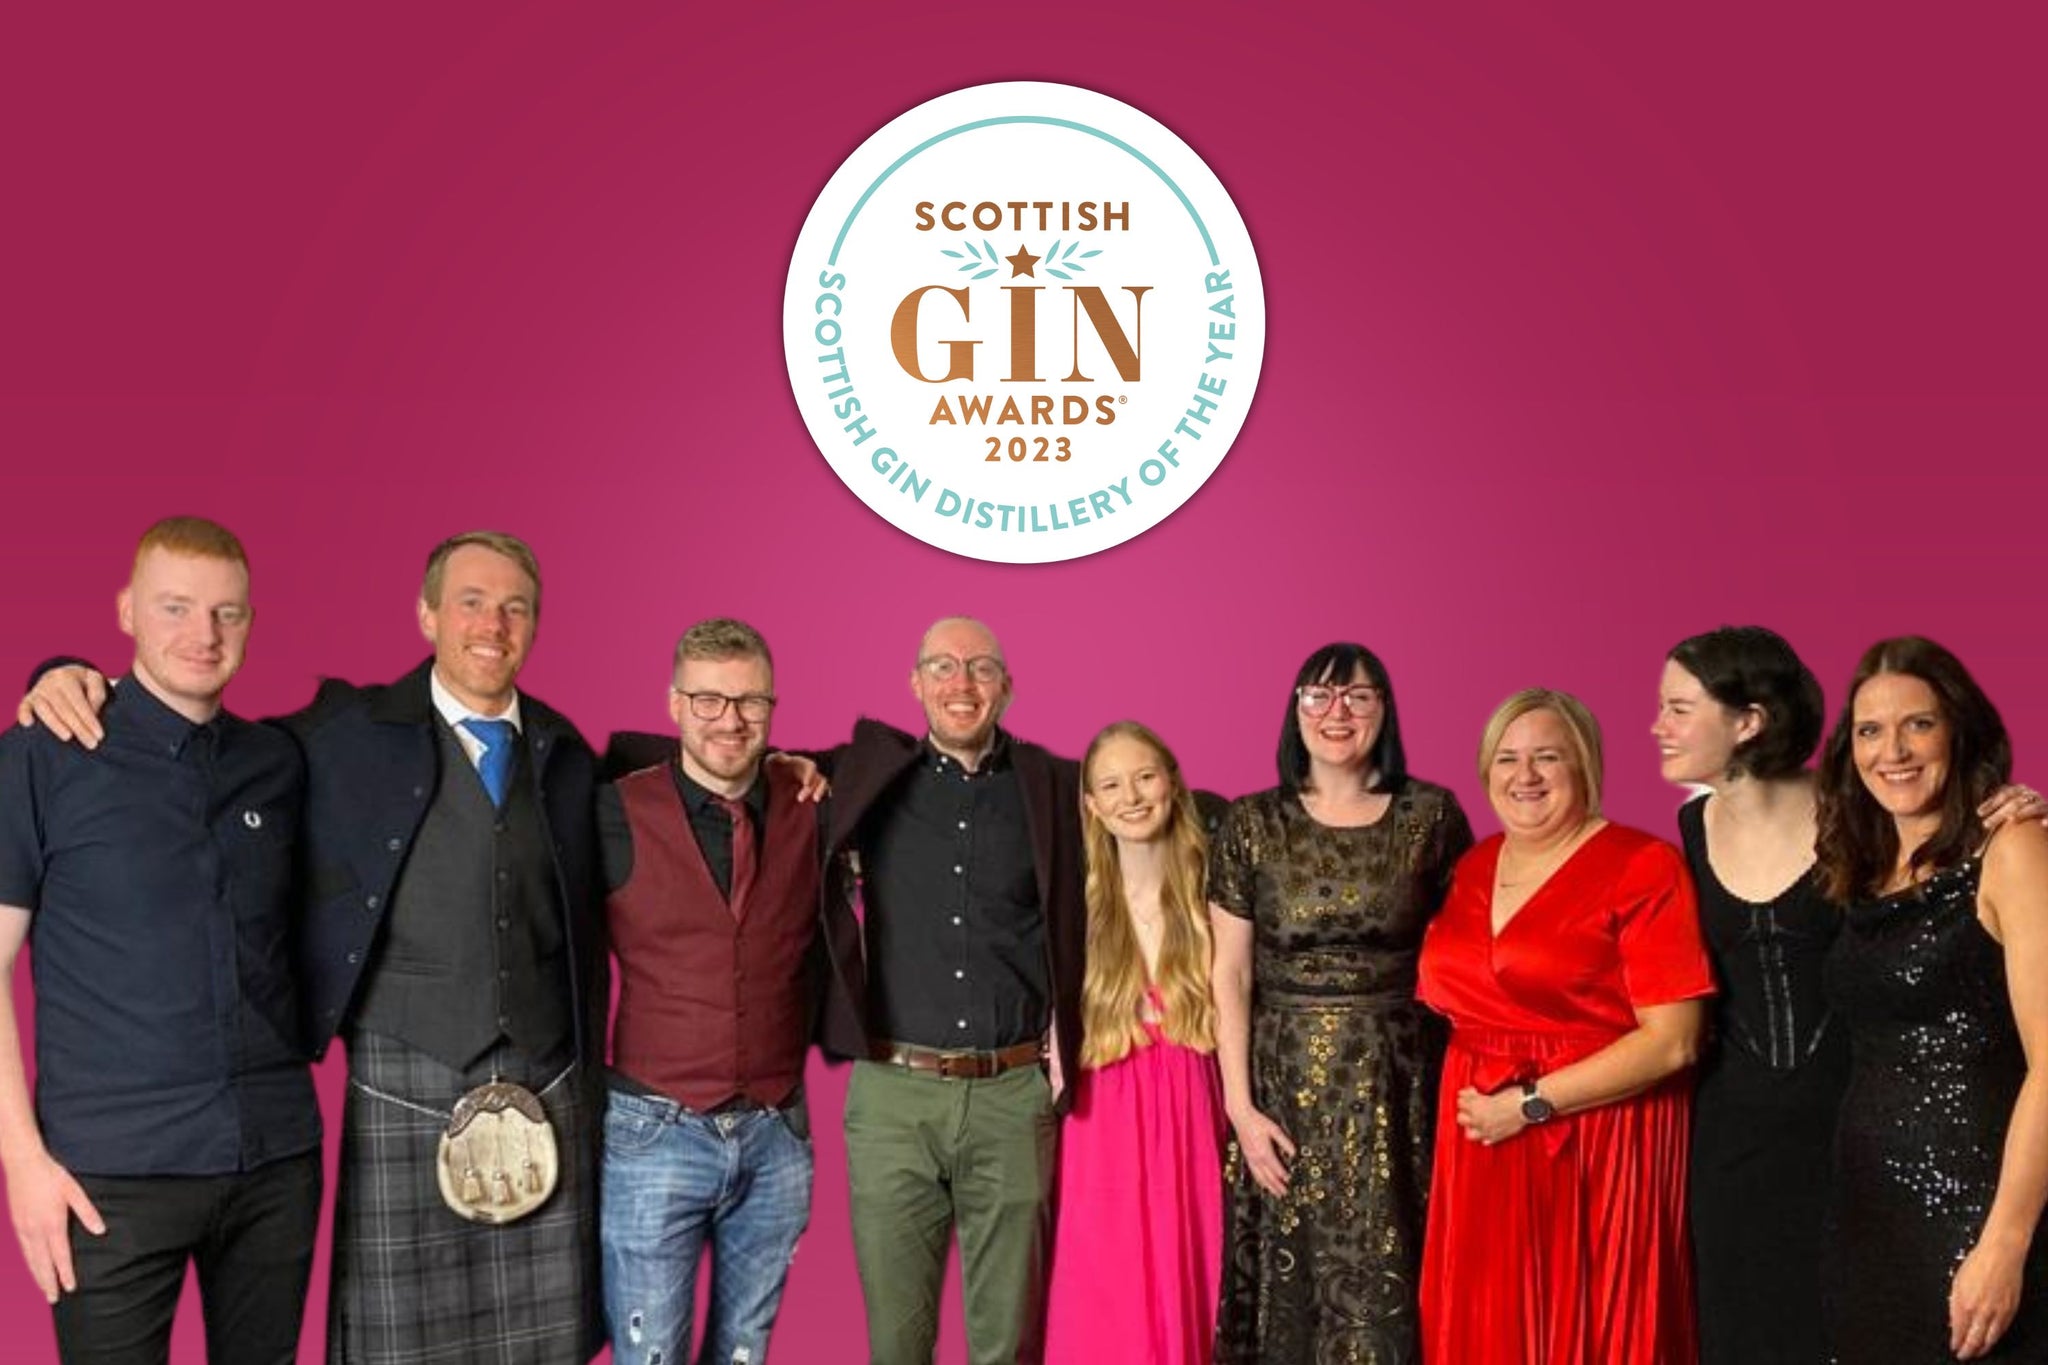 A group of people stand in front of a pink backdrop with the Scottish Gin Awards logo on it